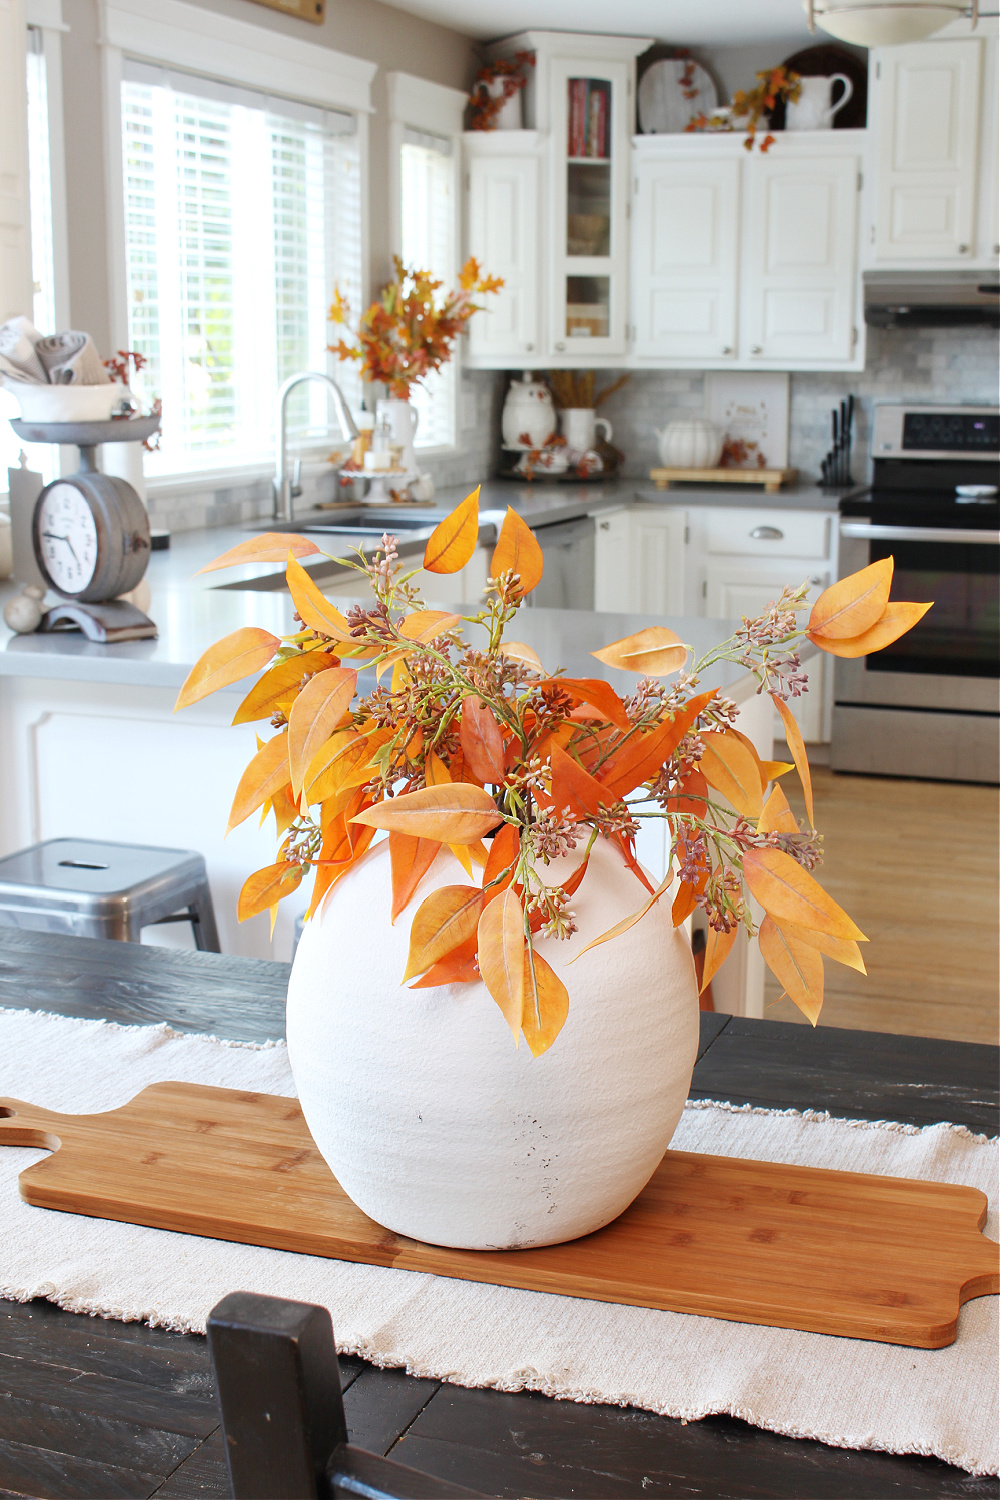 https://www.cleanandscentsible.com/wp-content/uploads/2022/09/fall-decor-for-kitchen-19-edit.jpg